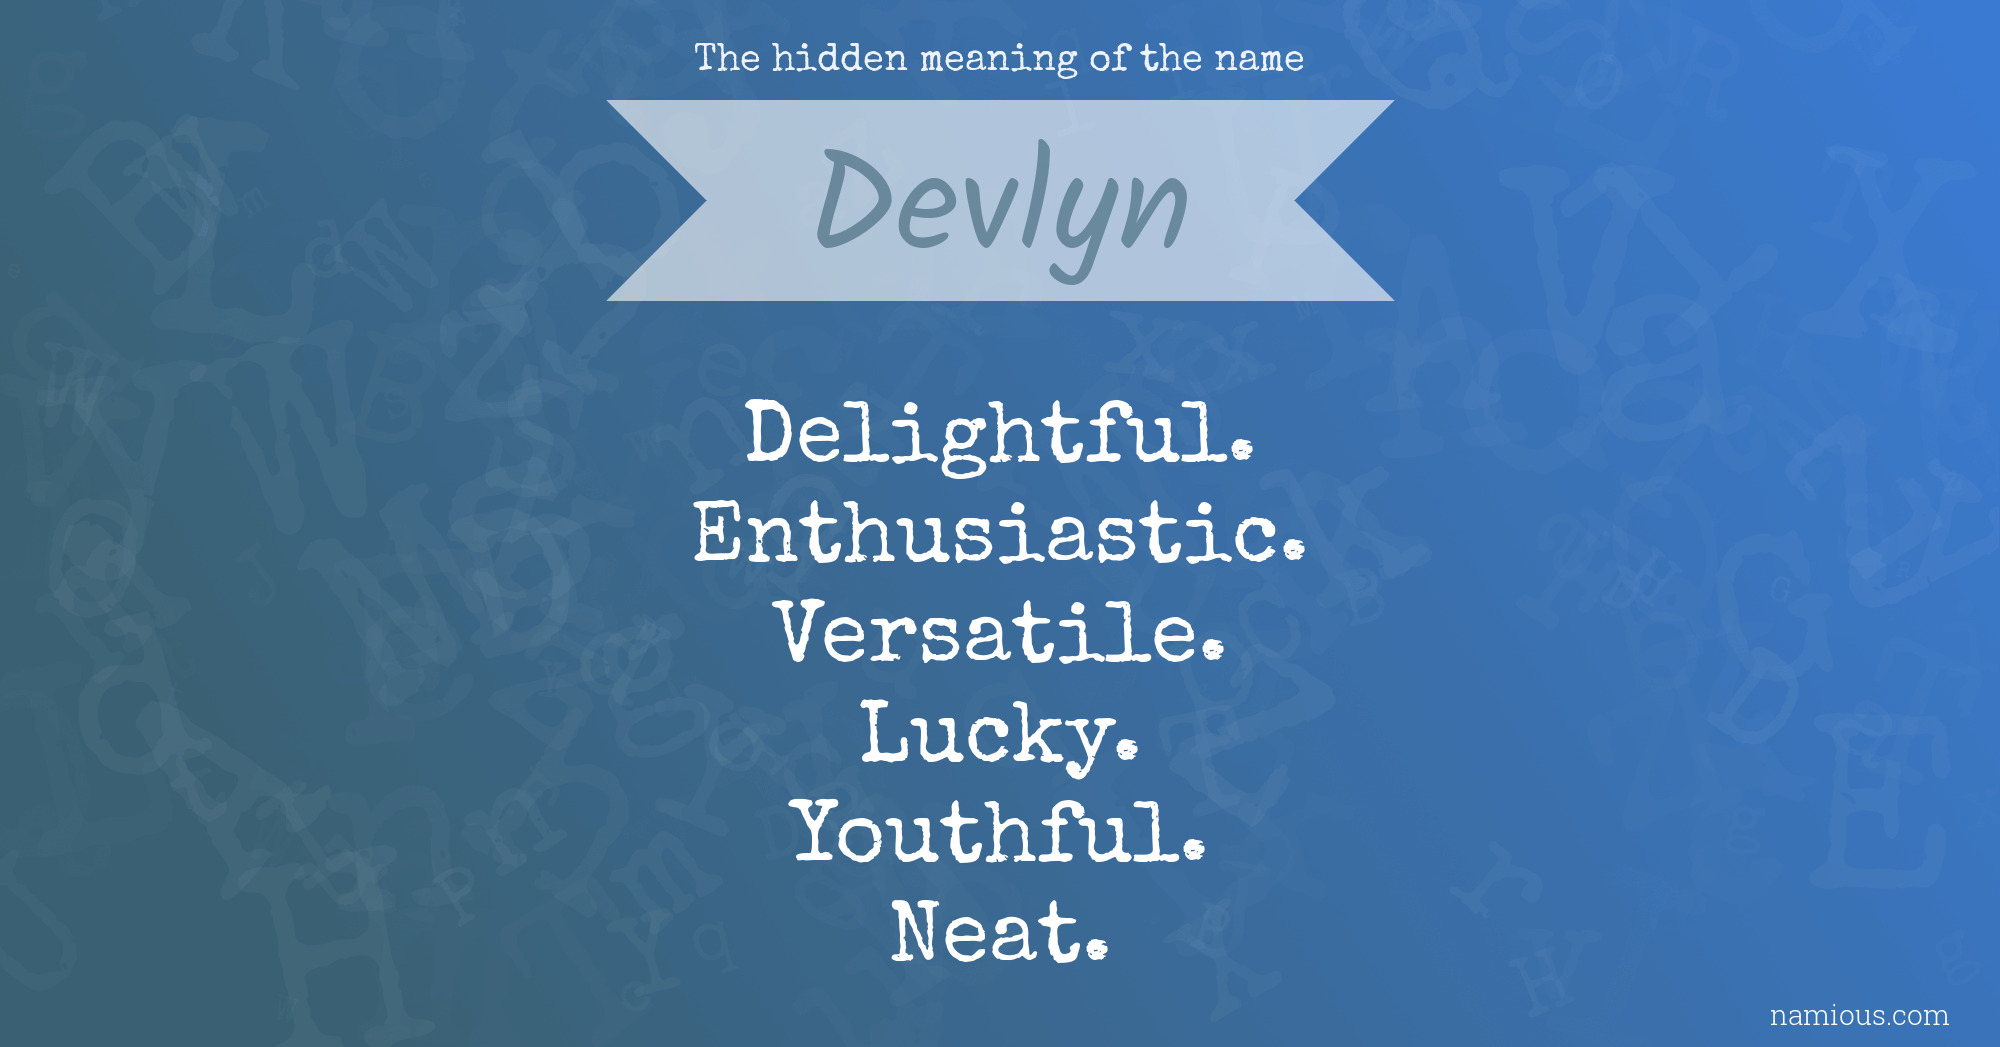 The hidden meaning of the name Devlyn